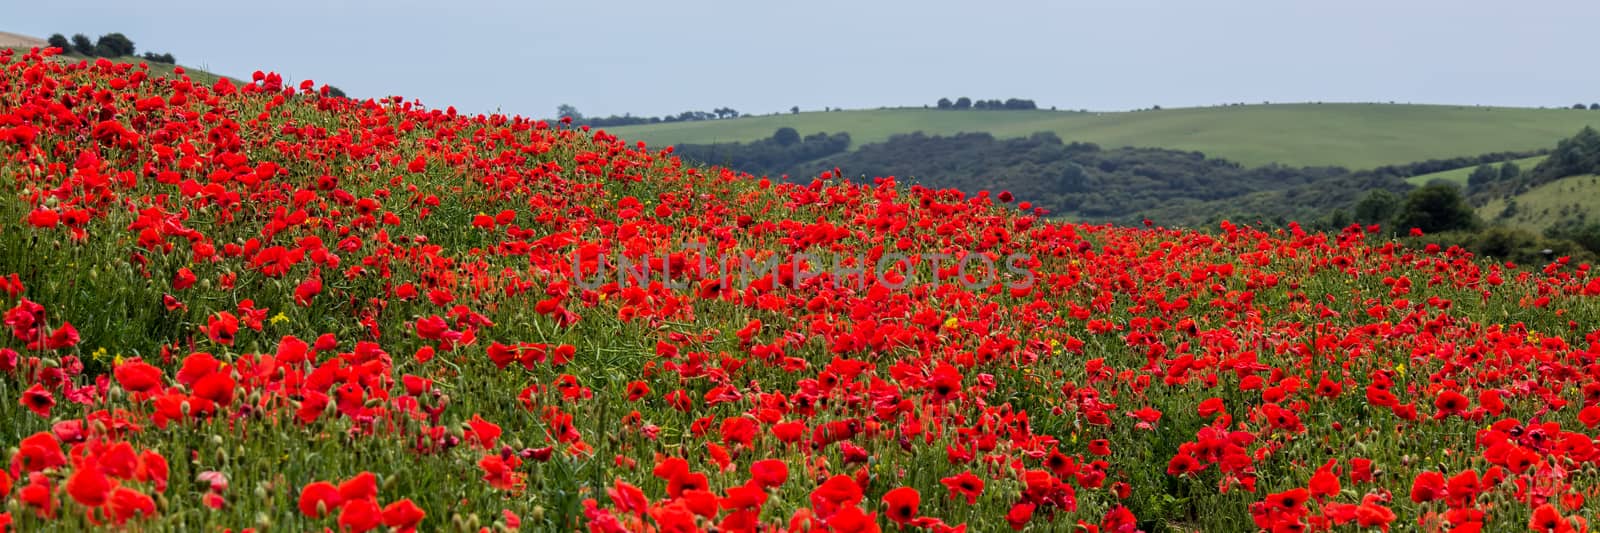 Field of Poppies in Sussex by phil_bird